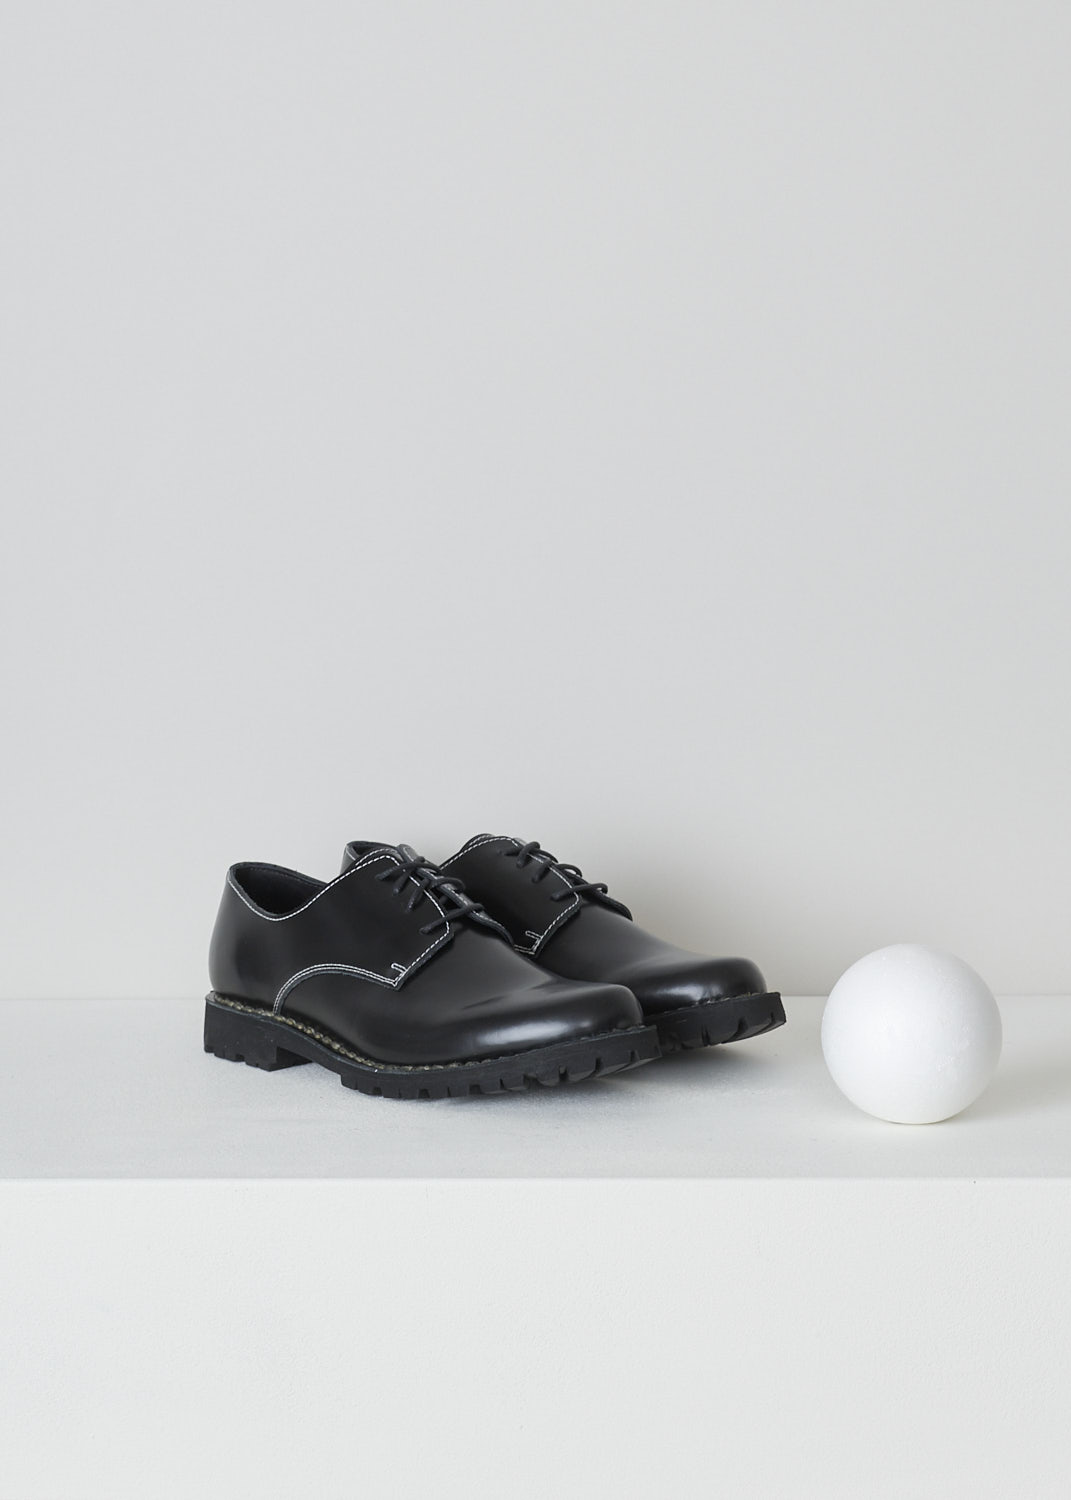 SOFIE Dâ€™HOORE, BLACK DERBY SHOES WITH WHITE STITCHING, FILOS_LJAZ_BLACK,  Black, Front, These black leather derby shoes have a round nose and a classic lace-up closing with black laces. Contrasting white stitching is used throughout. The shoes have sturdy Vibram soles. 
